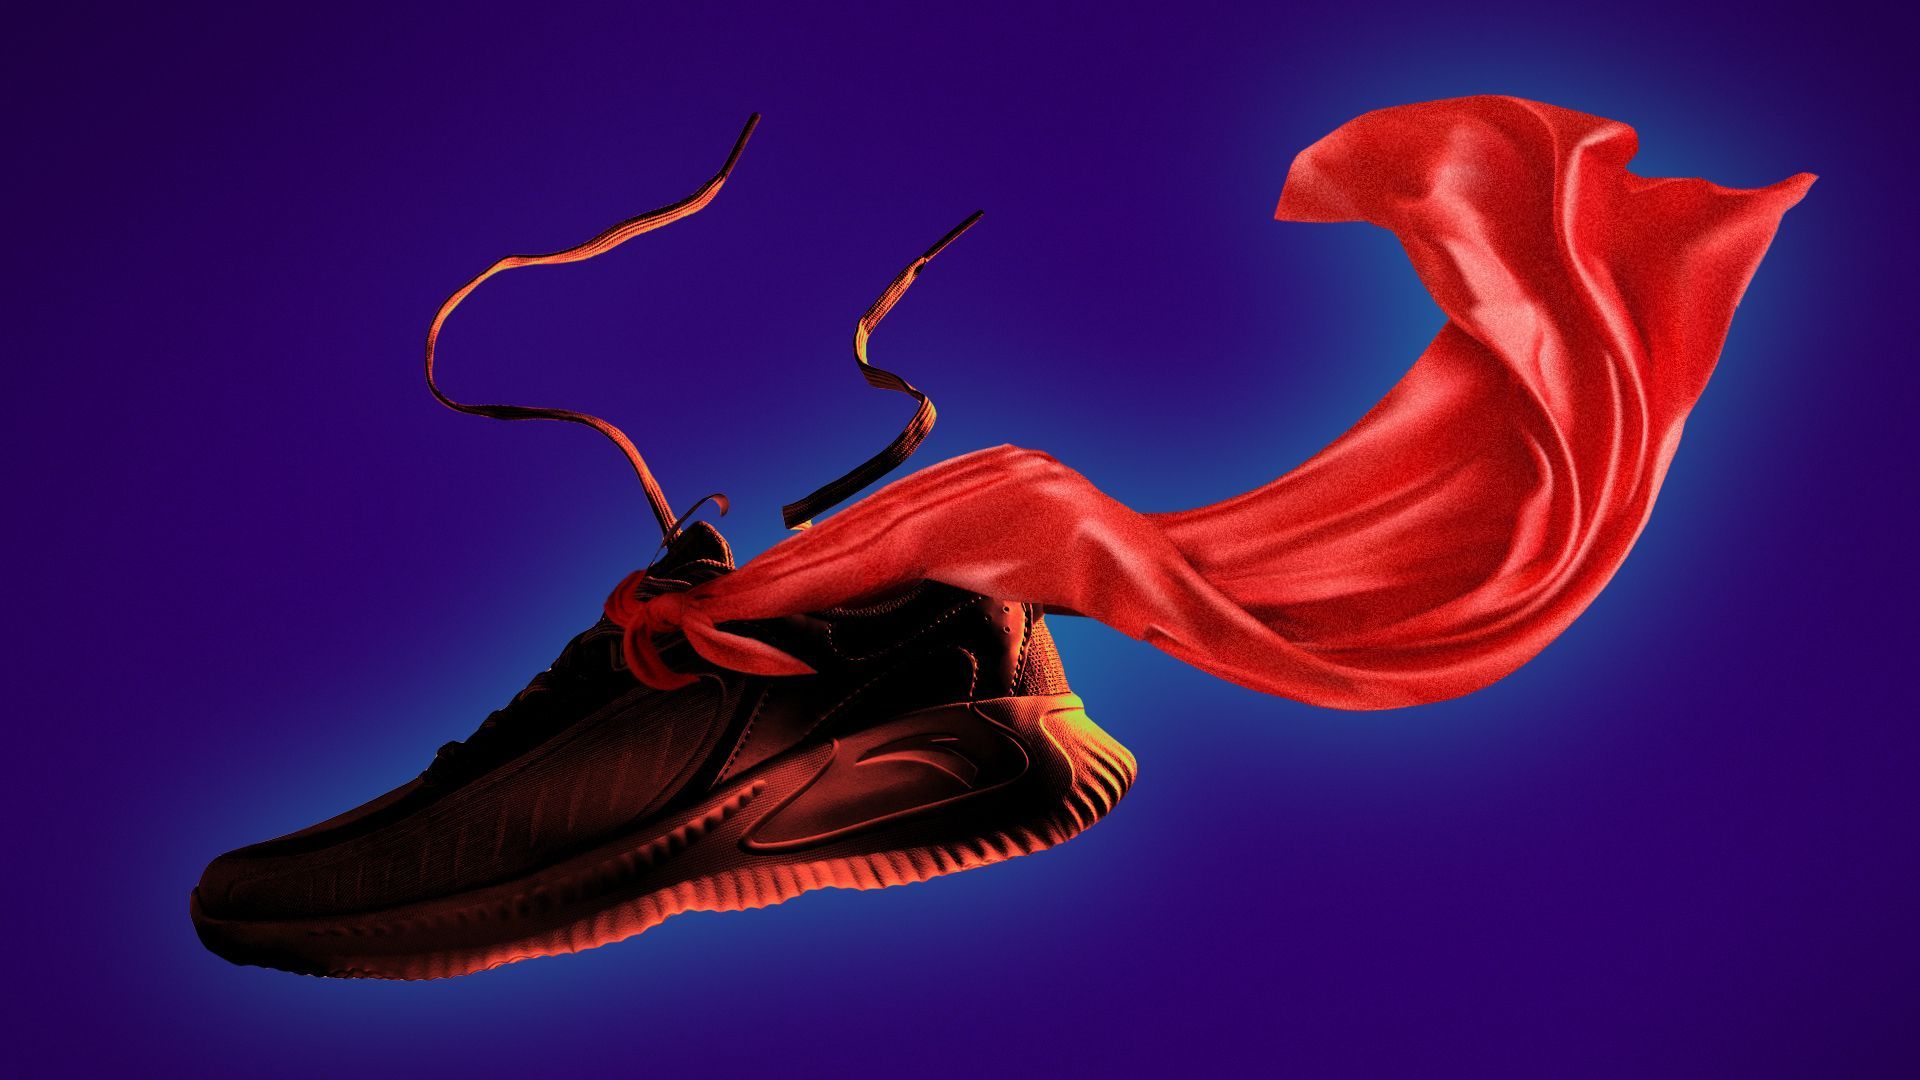 Illustration of a shoe suspended in air with a cape flying behind it.